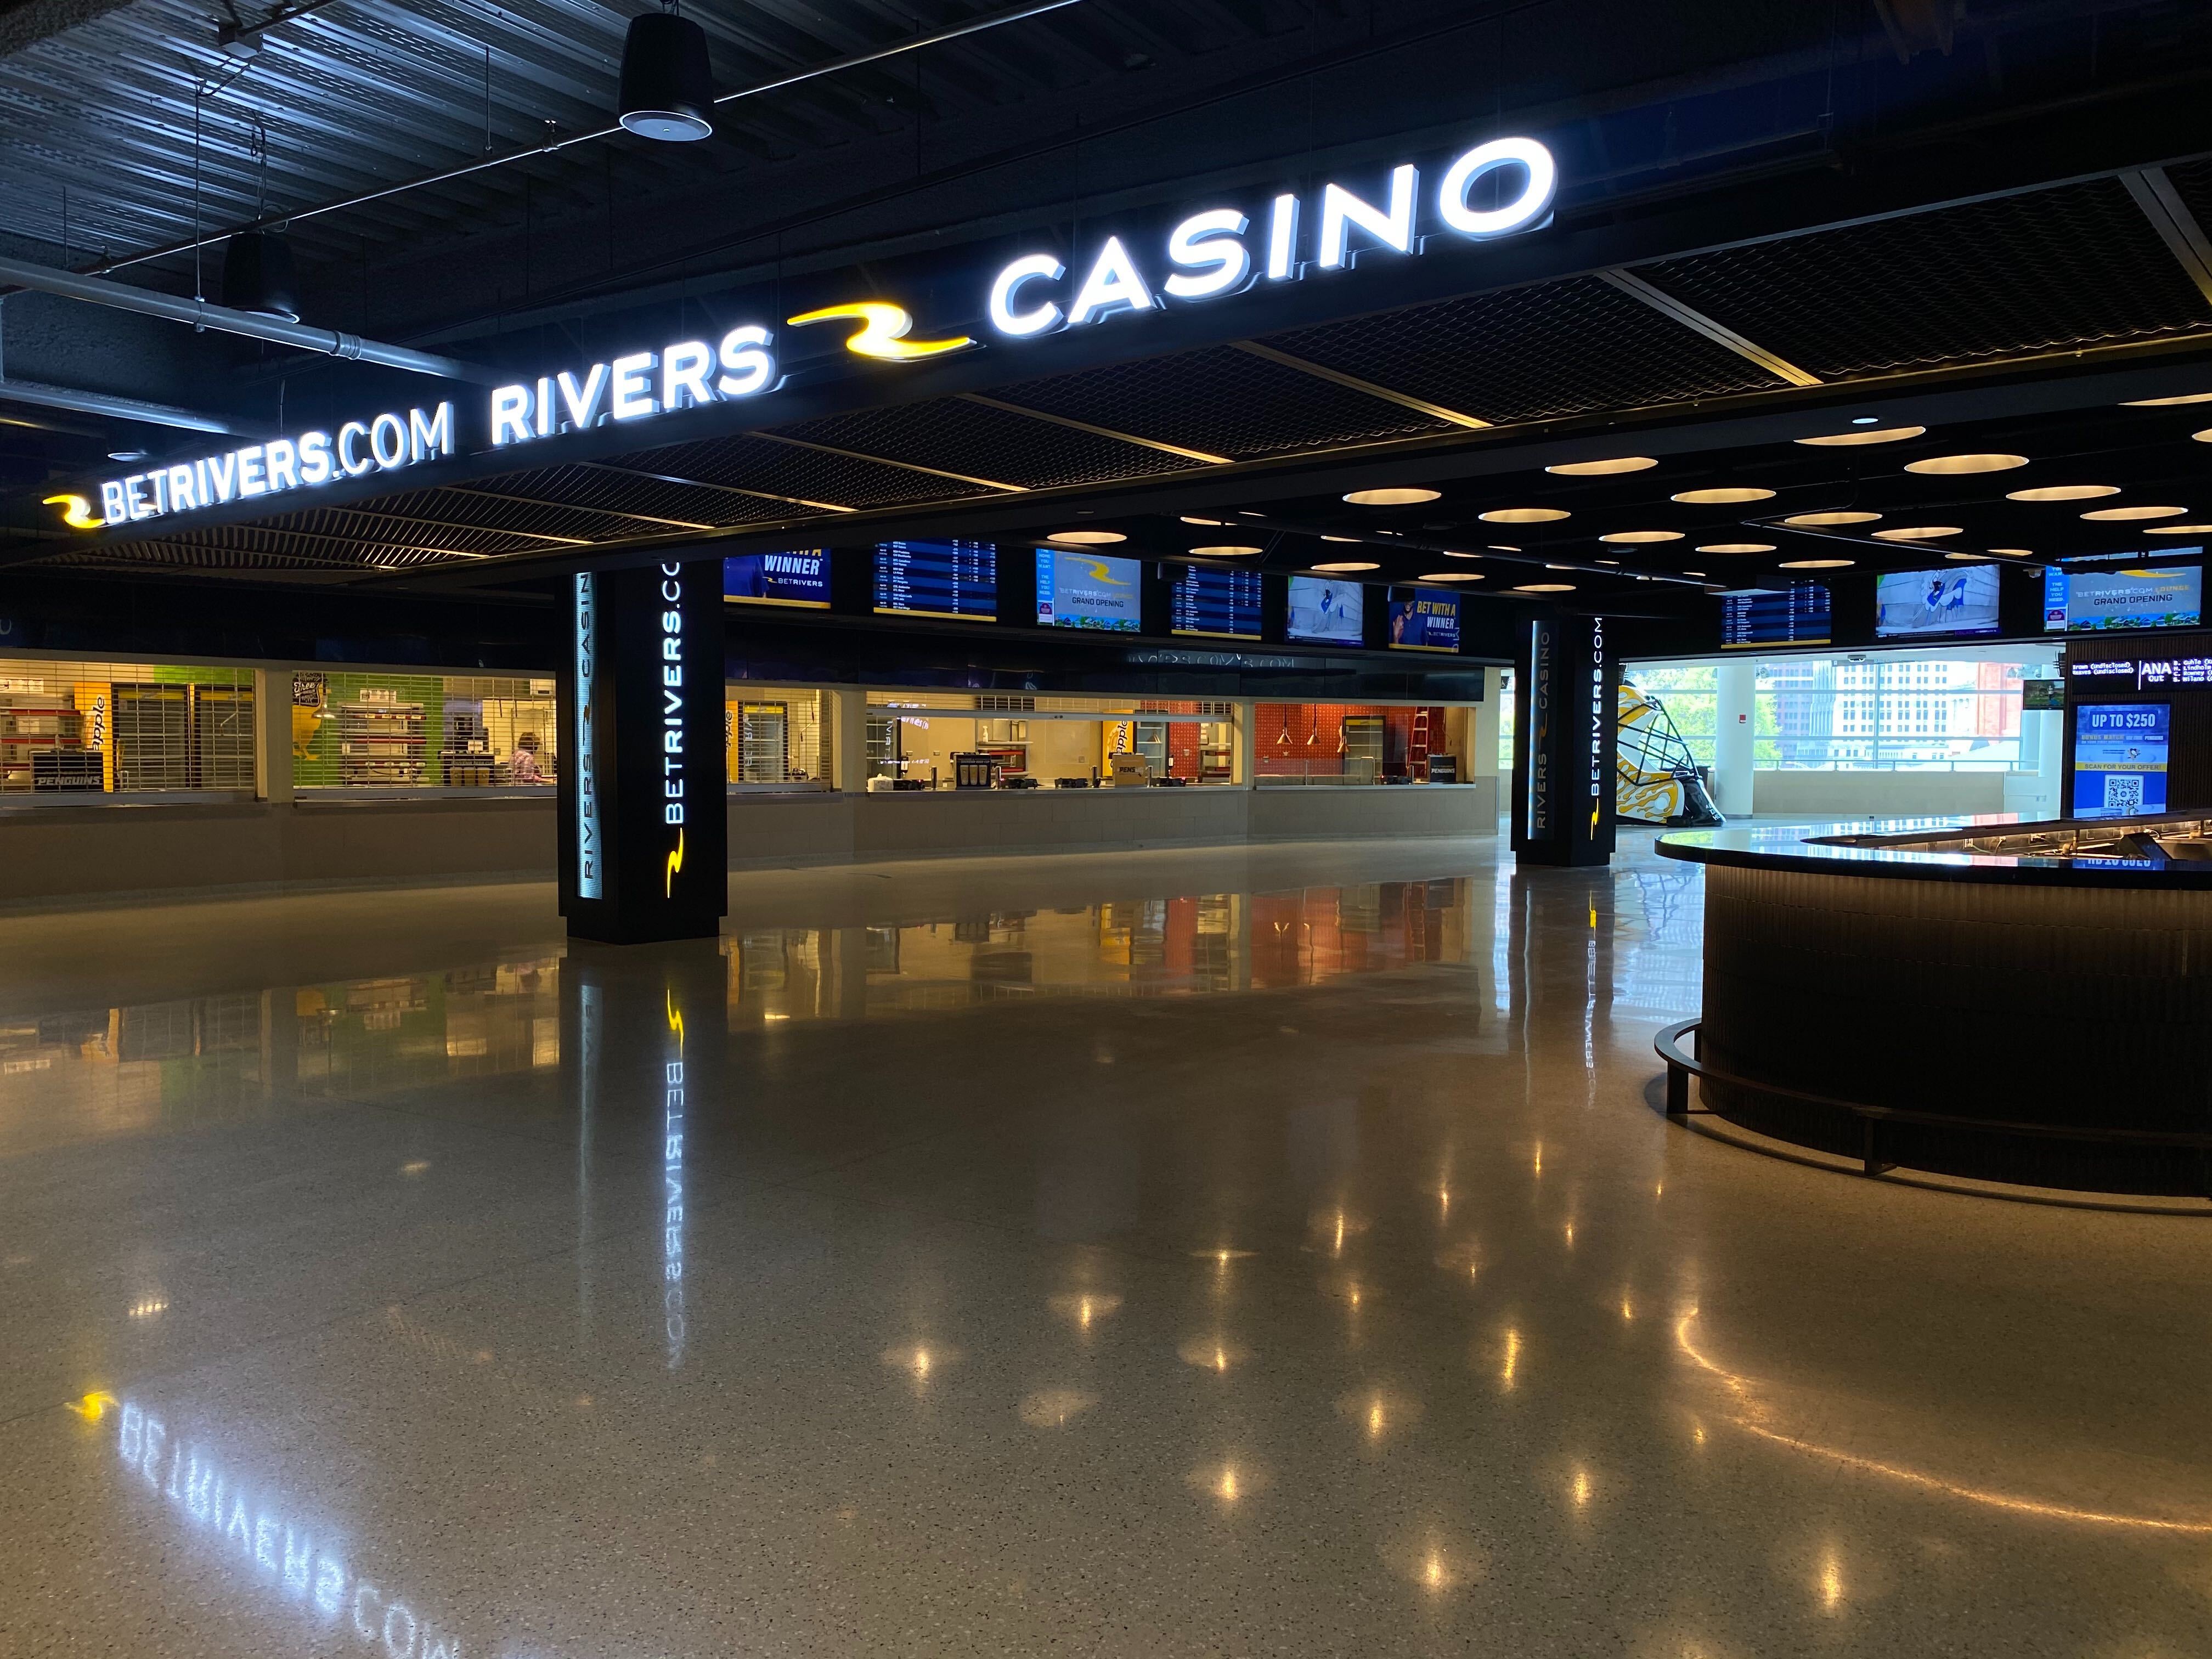 BetRivers Lounge Built Into Existing PPG Paints Arena Space